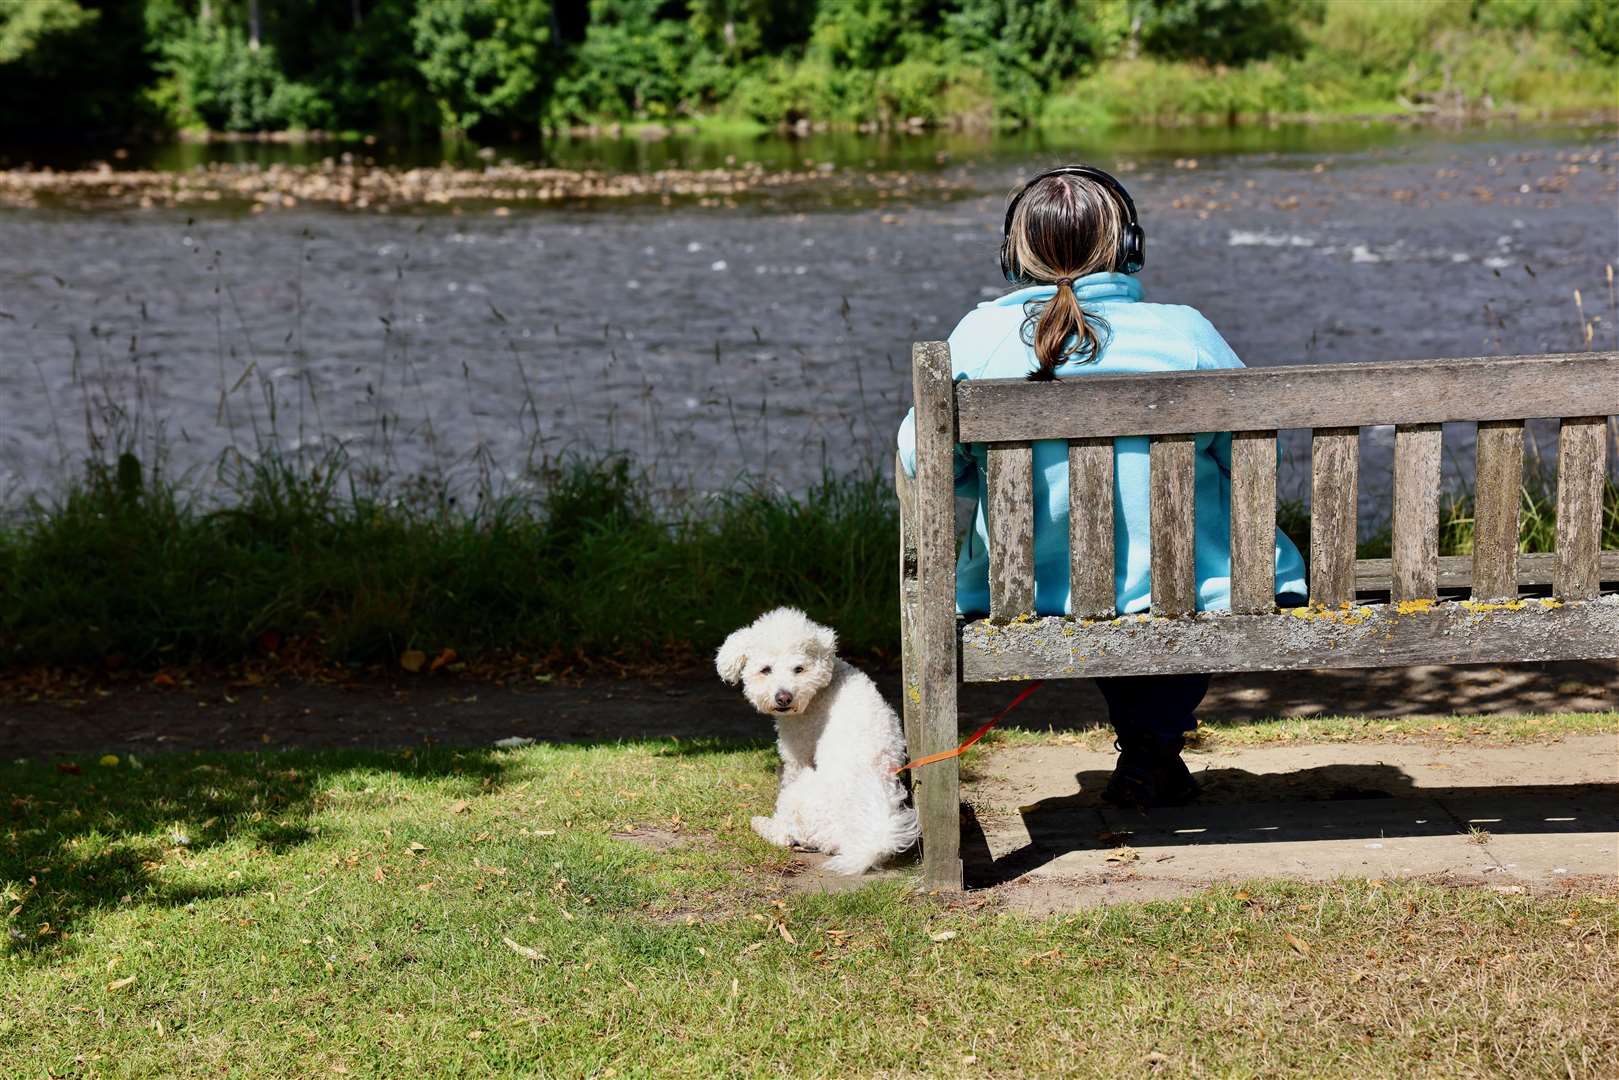 This little dog waits patiently while its owner listens. All pictures: Graeme Roger (Wildbird)